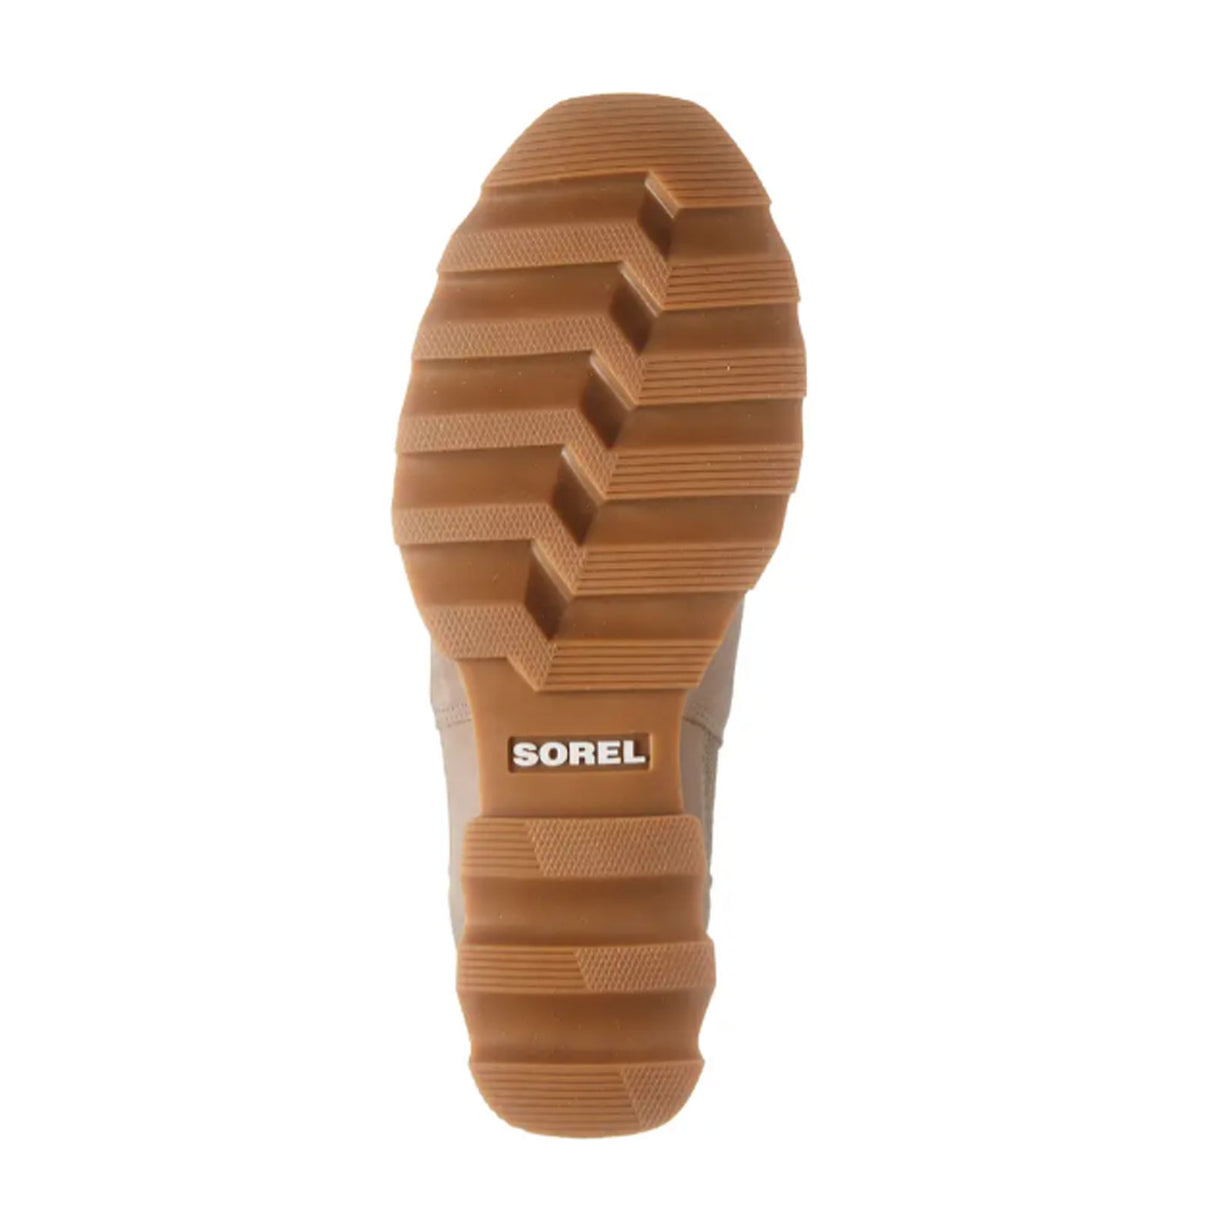 Sorel Joan of Arctic Wedge III Chelsea (Women) - Omega Taupe/Wet Sand Boots - Fashion - Wedge - The Heel Shoe Fitters